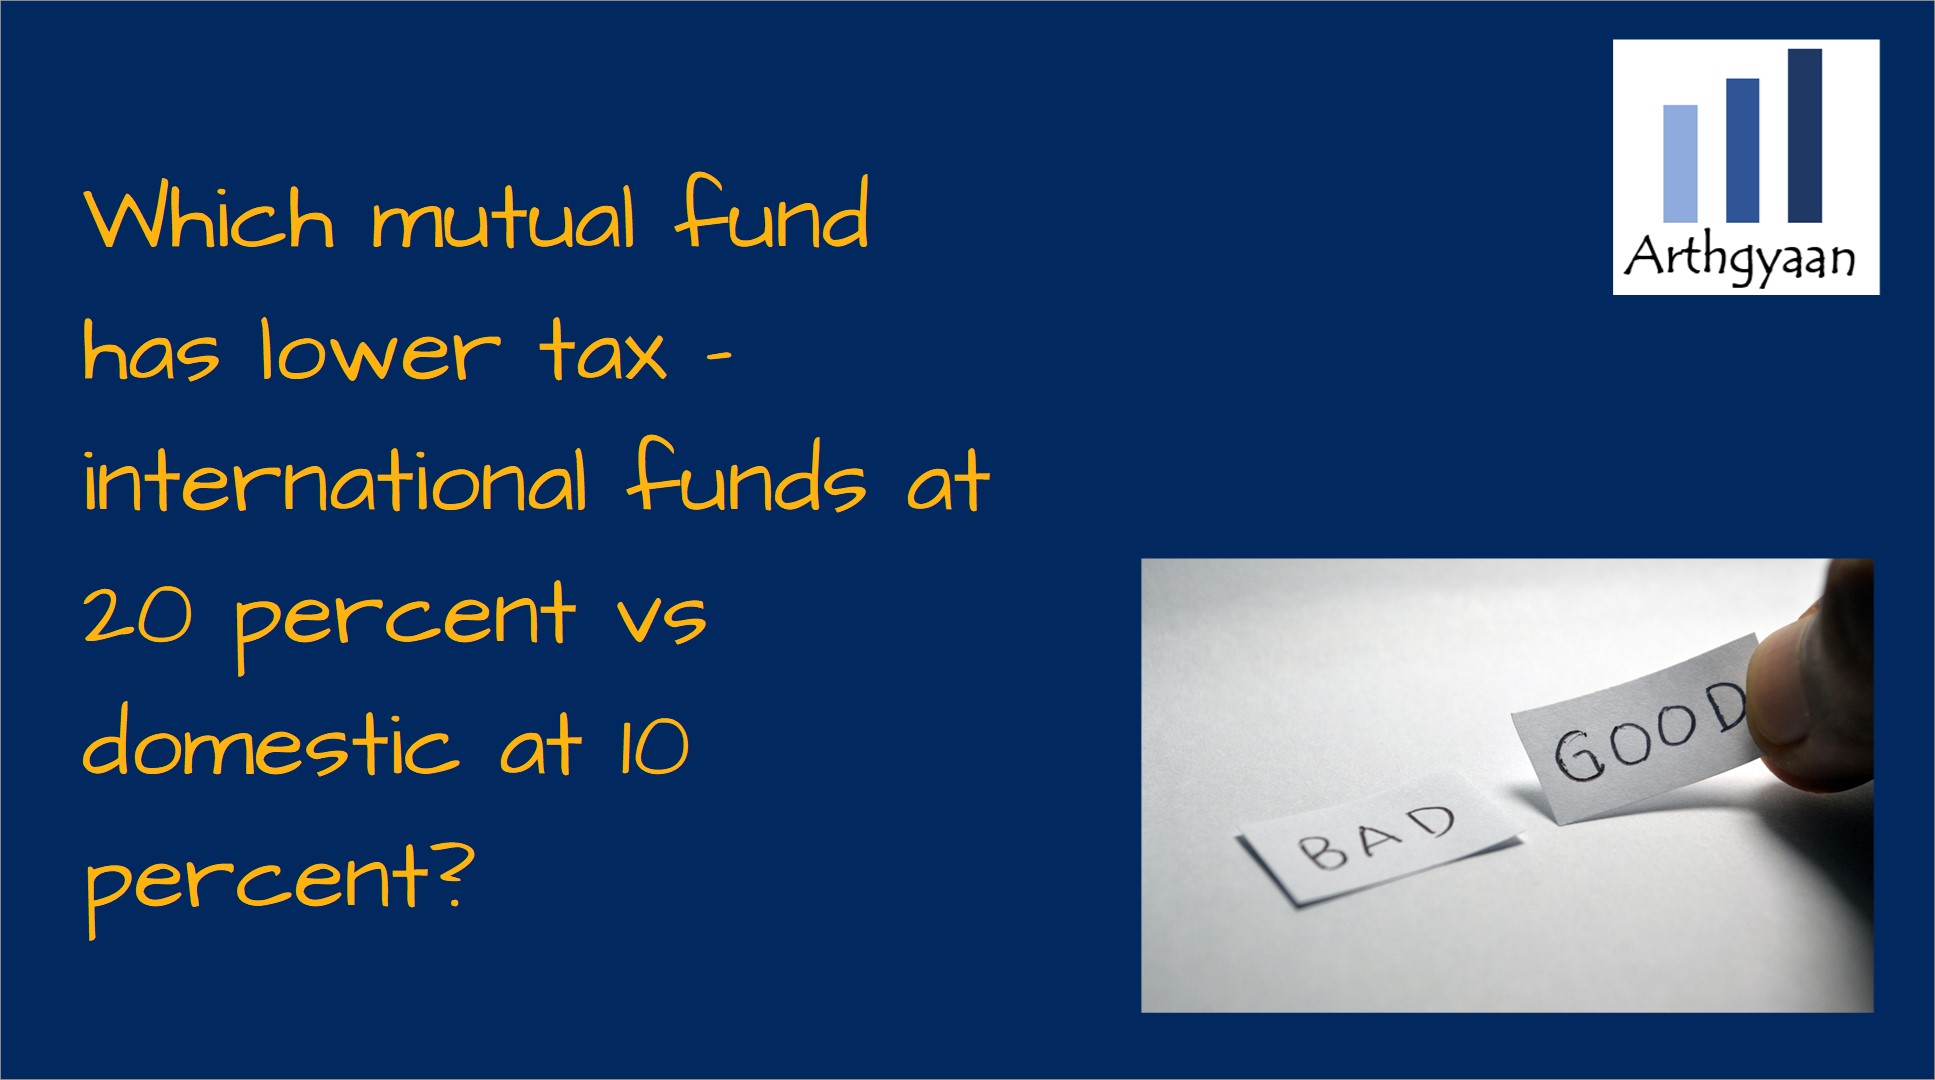 Which mutual fund has lower tax - international funds at 20 percent vs domestic at 10 percent?